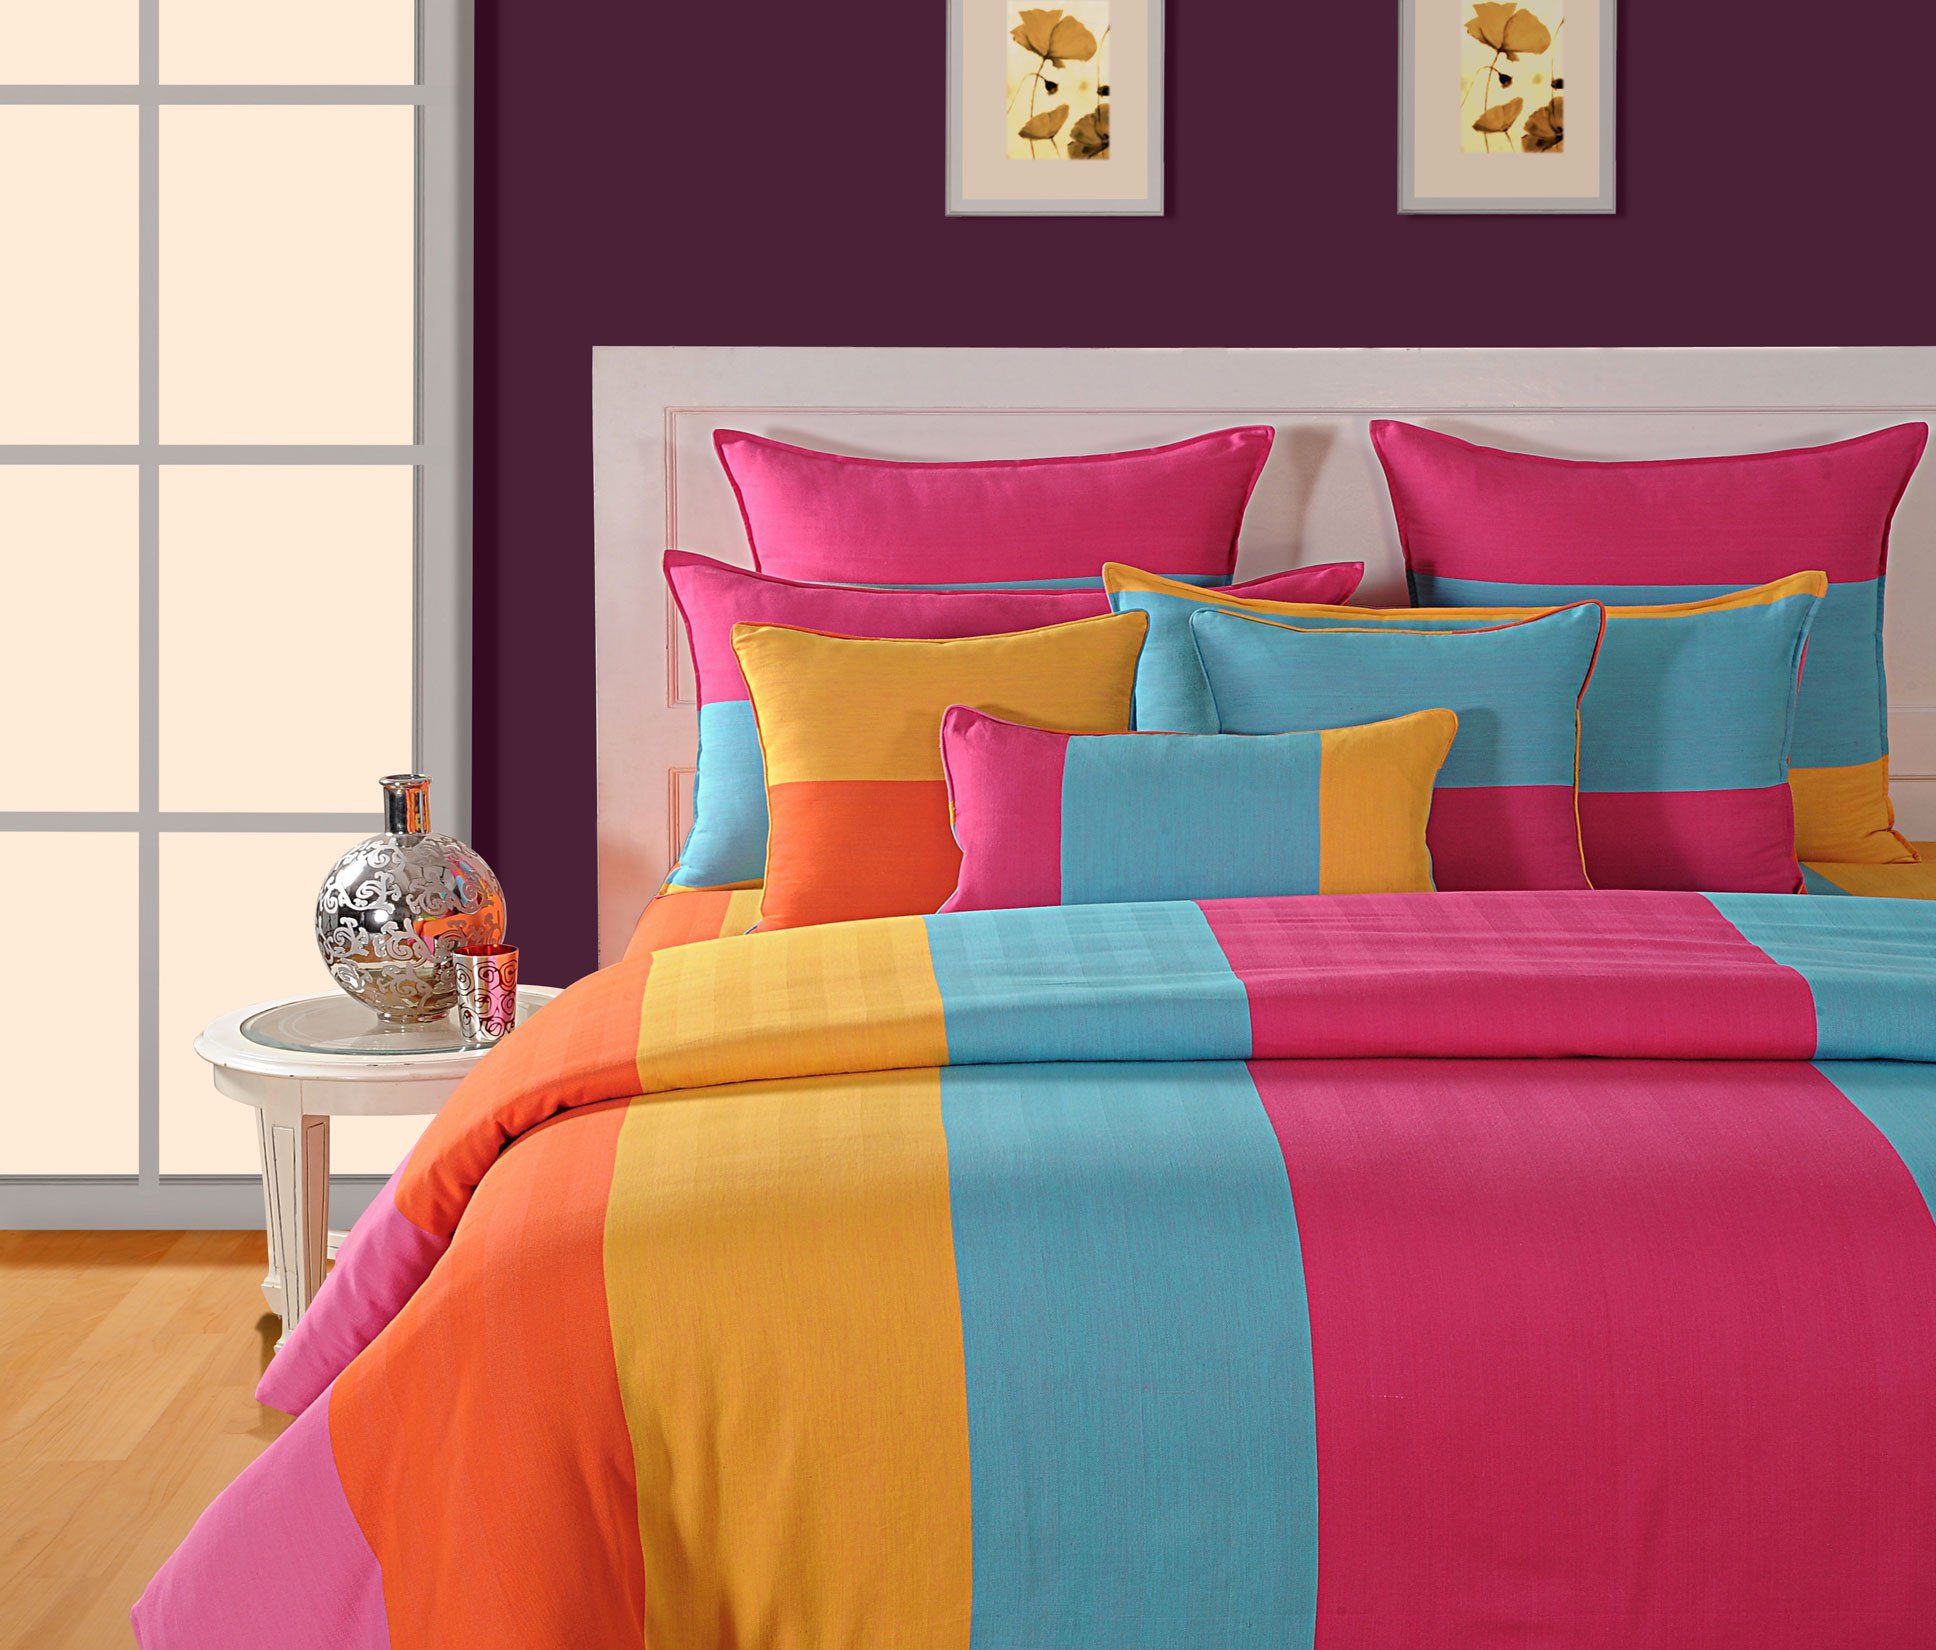 CANOPUS MULTI COLORED DUVET COVER - Flickdeal.co.nz